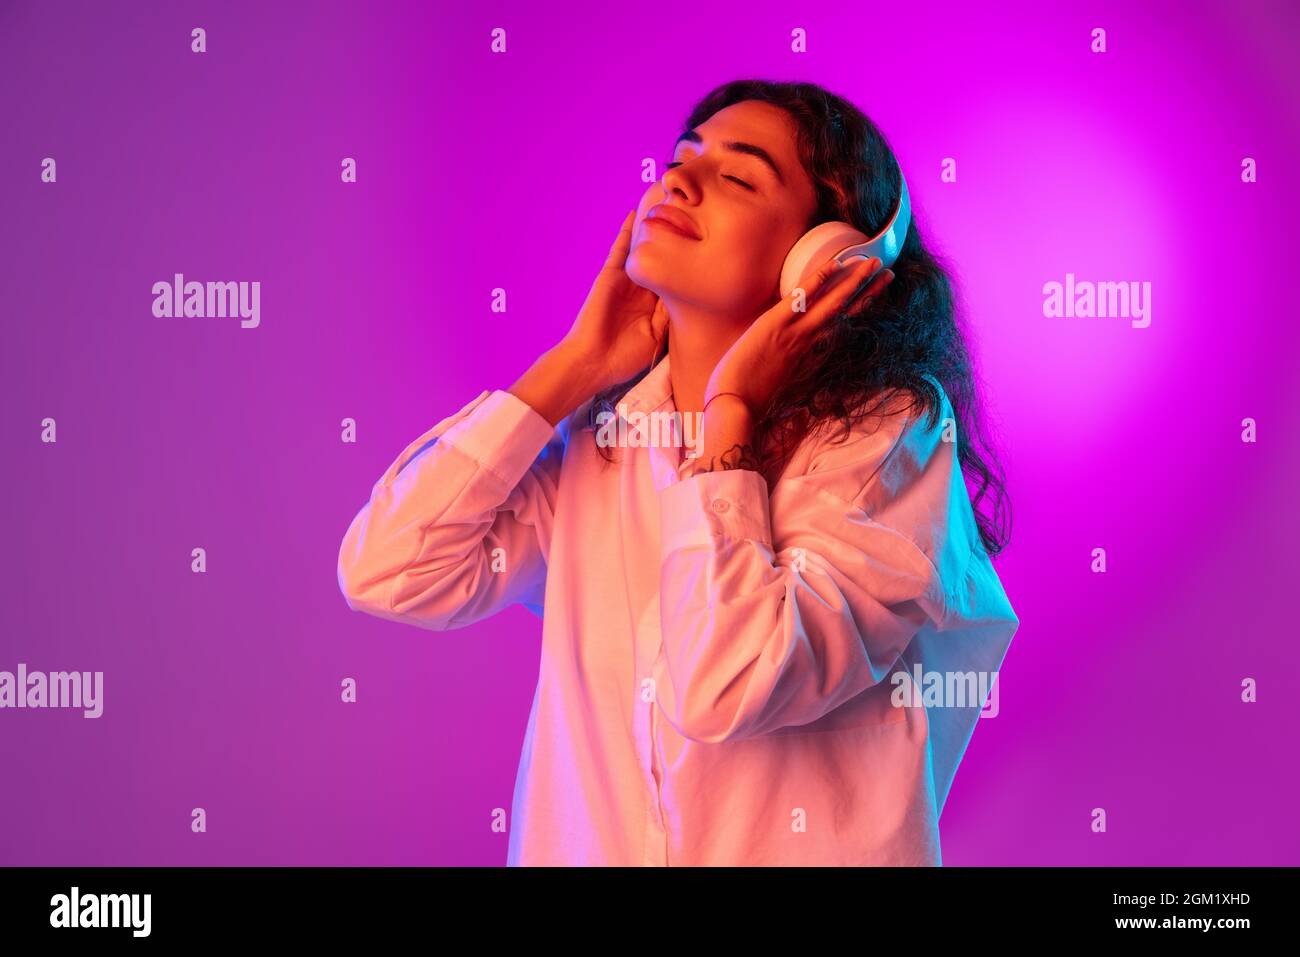 Portrait of Latino beautiful girl listening to music isolated on purple, lilac color studio background in neon light. Concept of human emotions Stock Photo